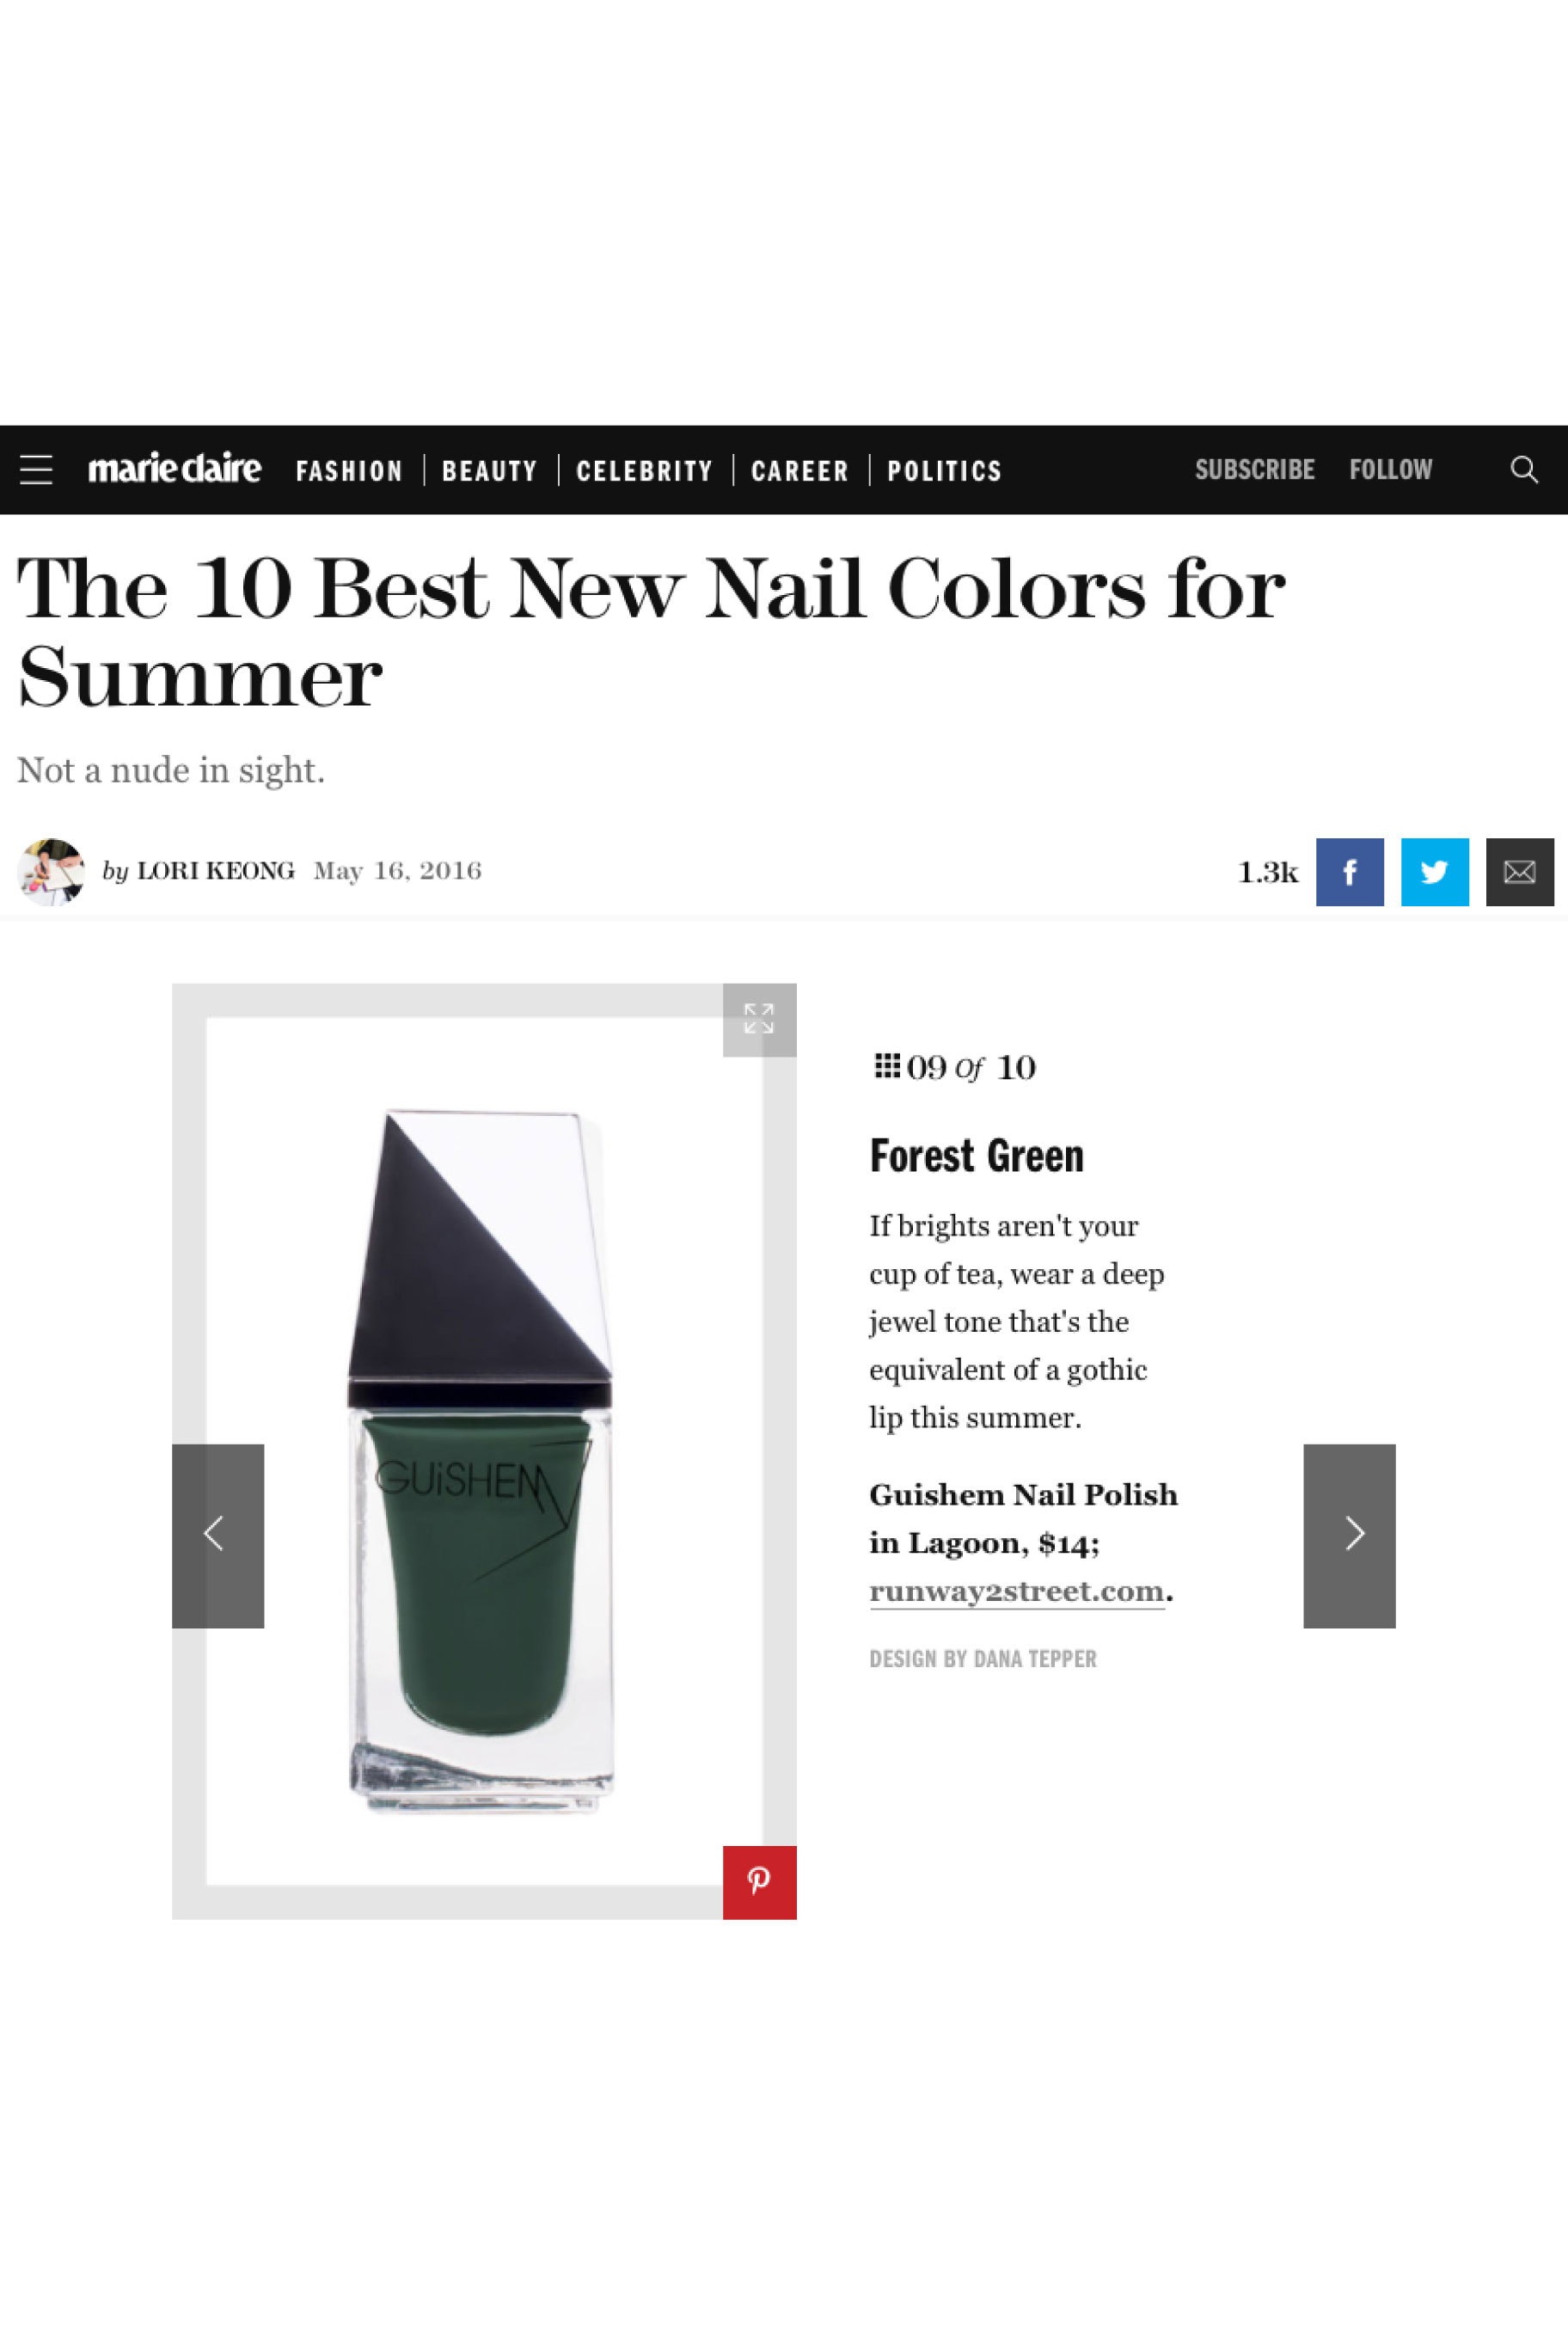 GUiSHEM featured in Marie Claire: The 10 Best New Nail Colors for Summer